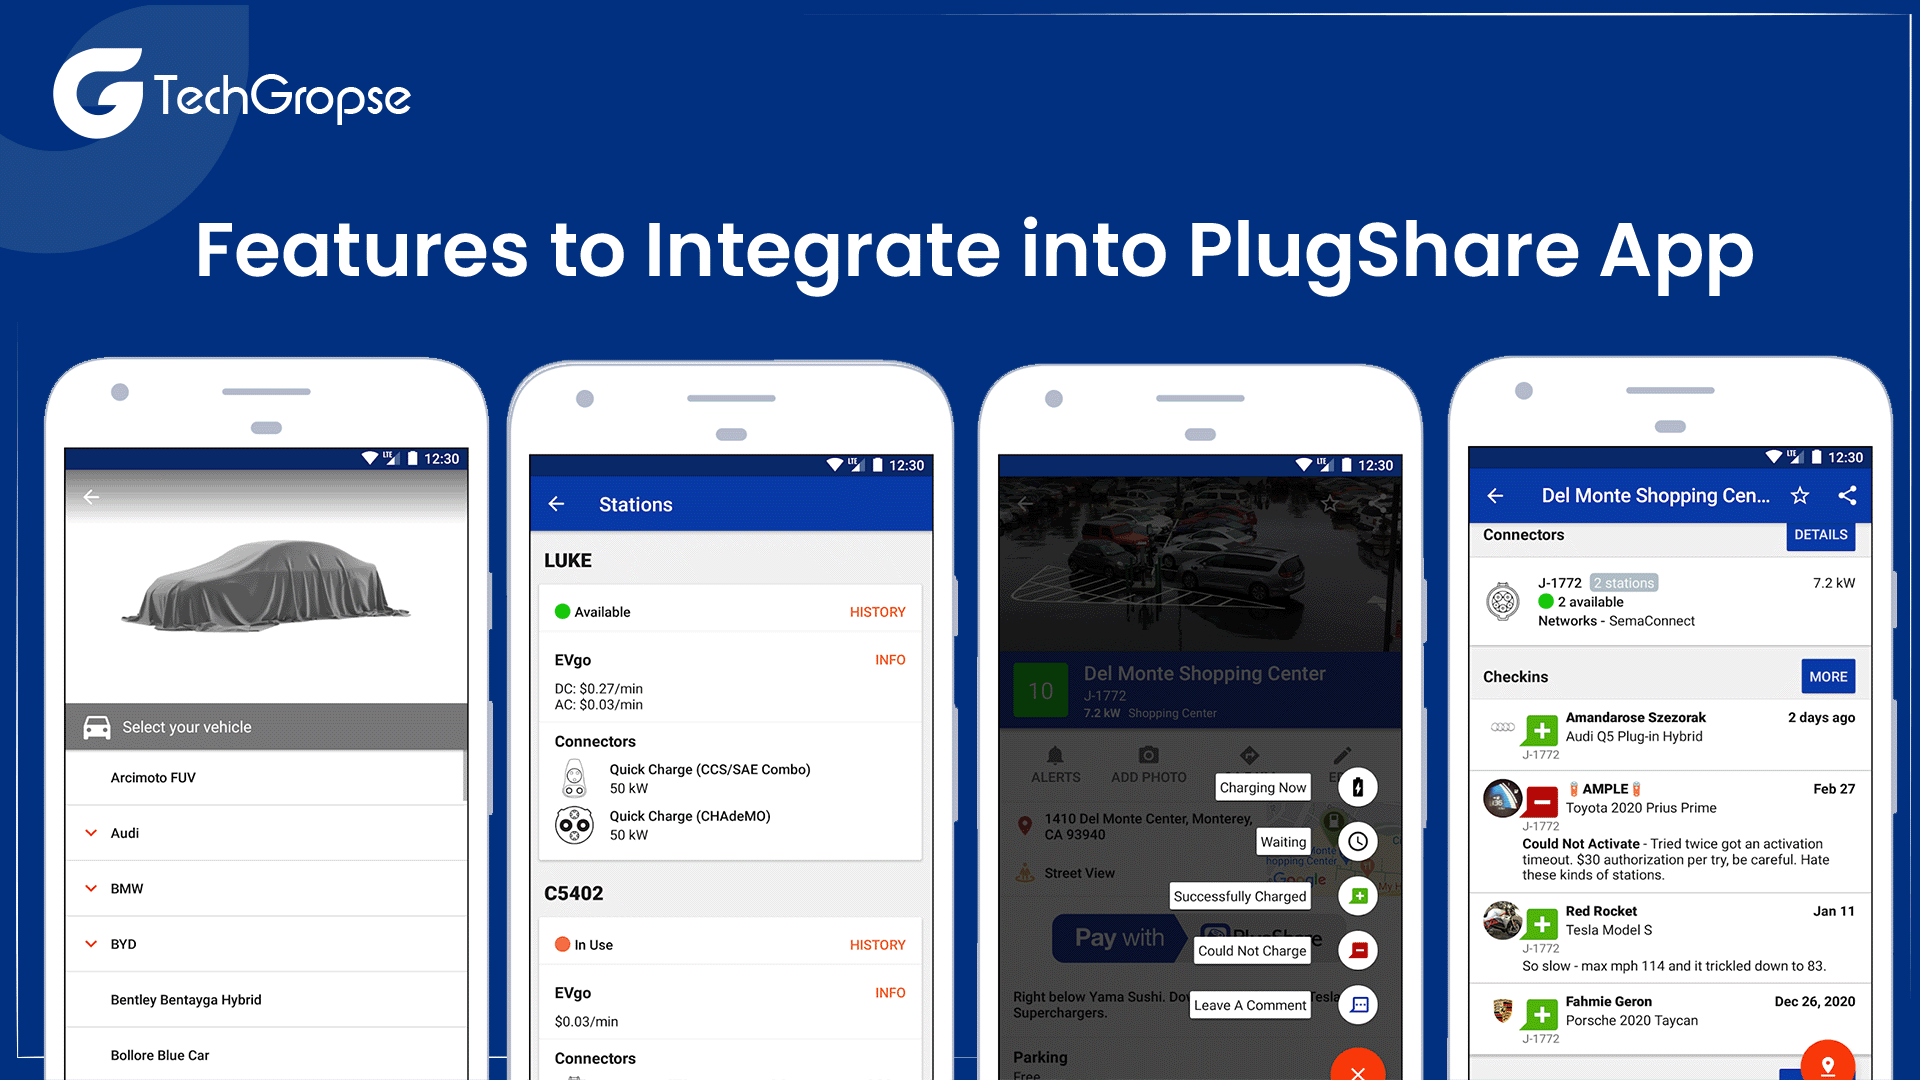 Features to Integrate into PlugShare App